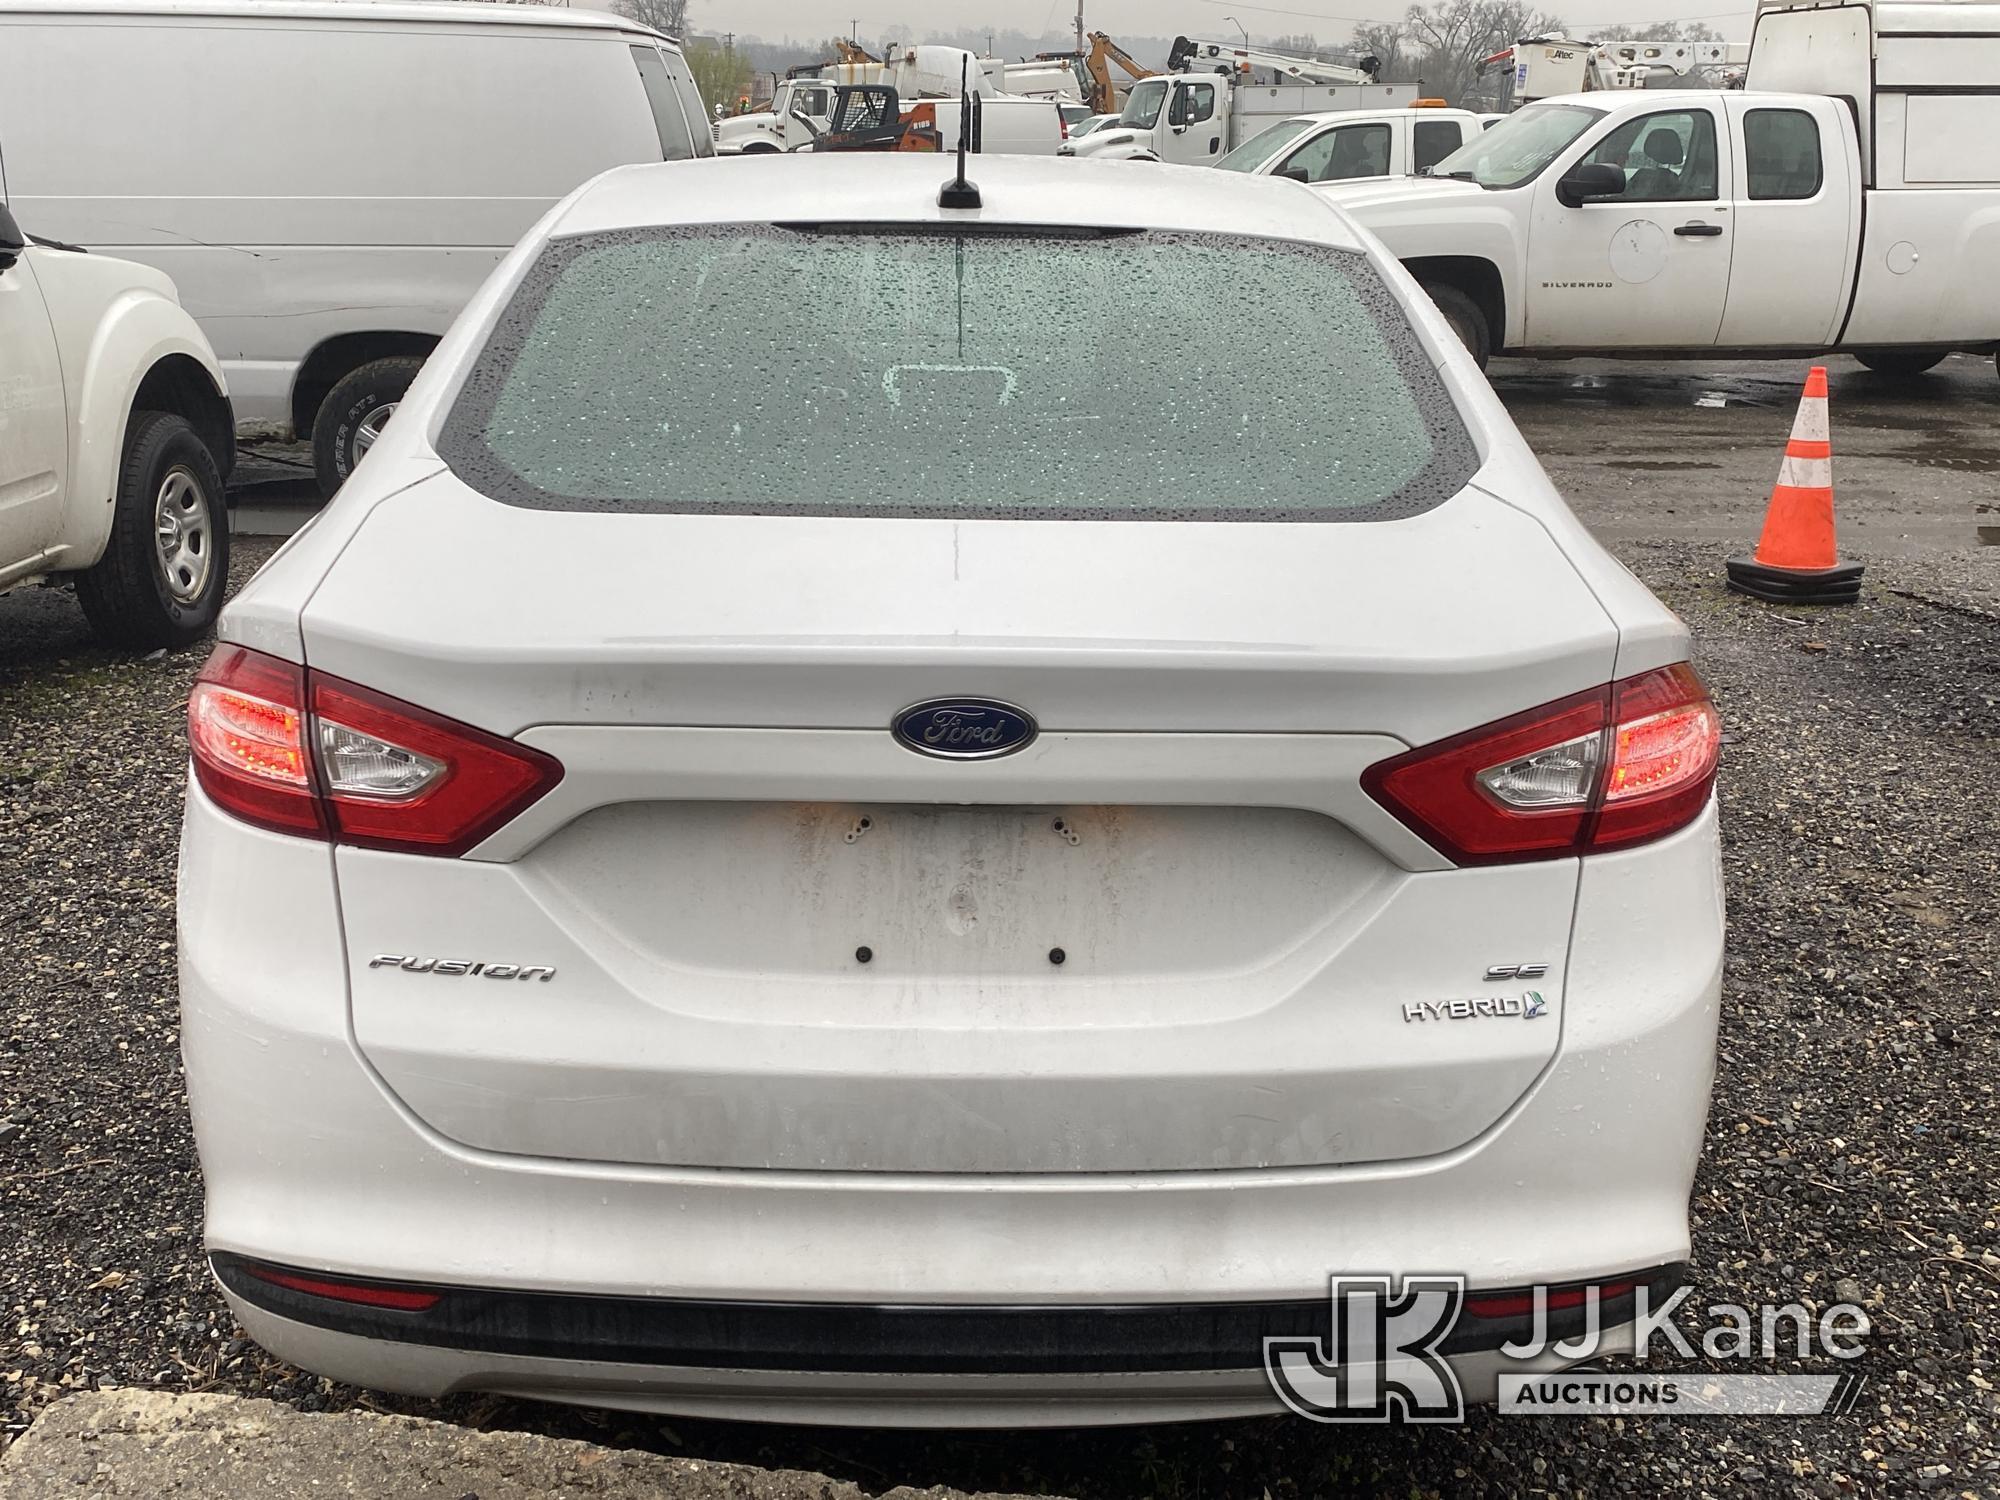 (Plymouth Meeting, PA) 2013 Ford Fusion Hybrid 4-Door Sedan Not Running, Condition Unknown, Body & R